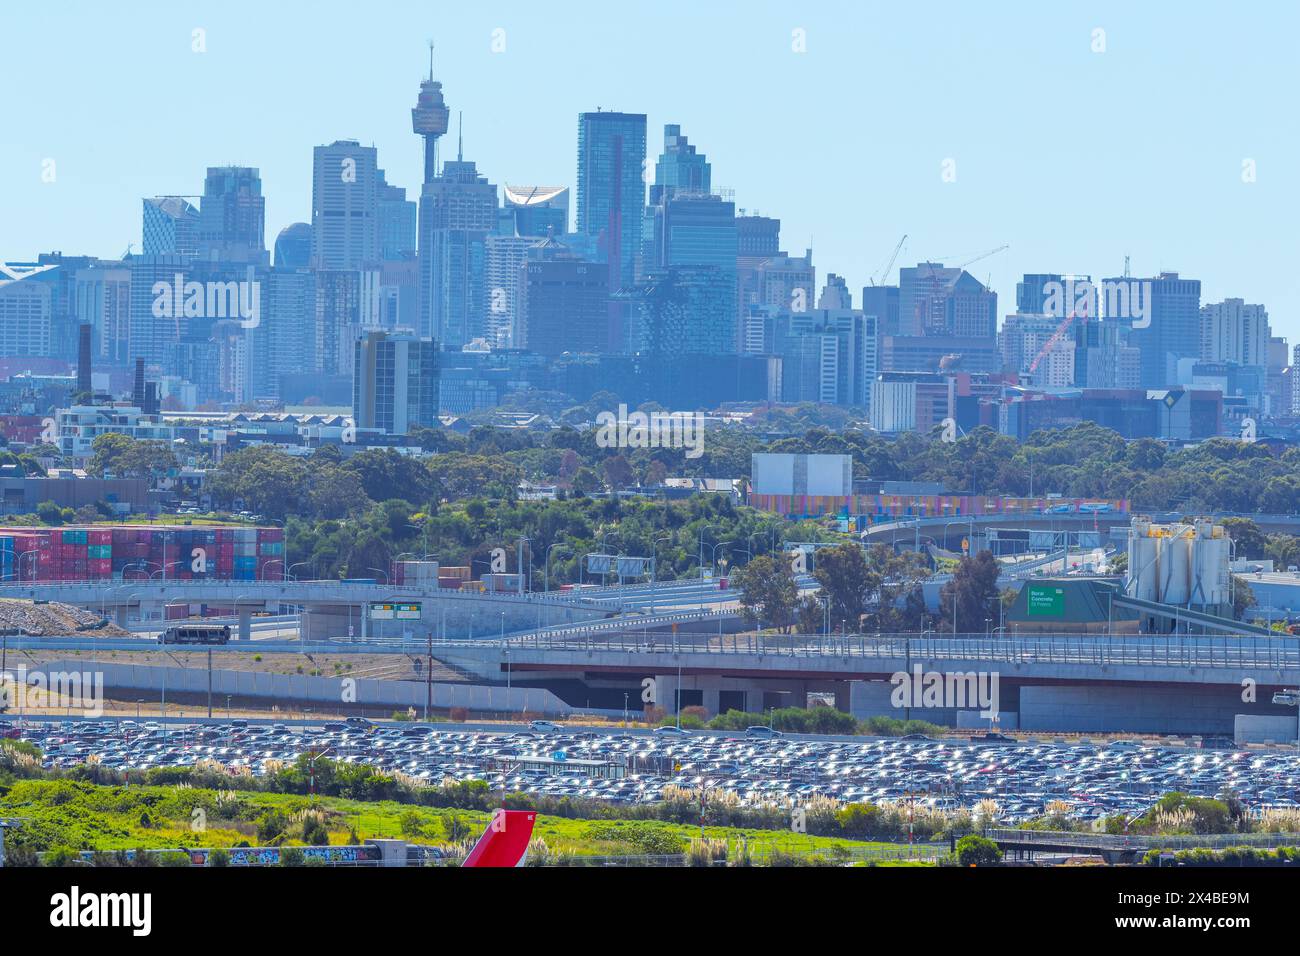 The Sydney skyline seen from Sydney Airport in Australia. The Sydney Gateway, creating new roads into the airport, can be seen in the middle-ground. Stock Photo